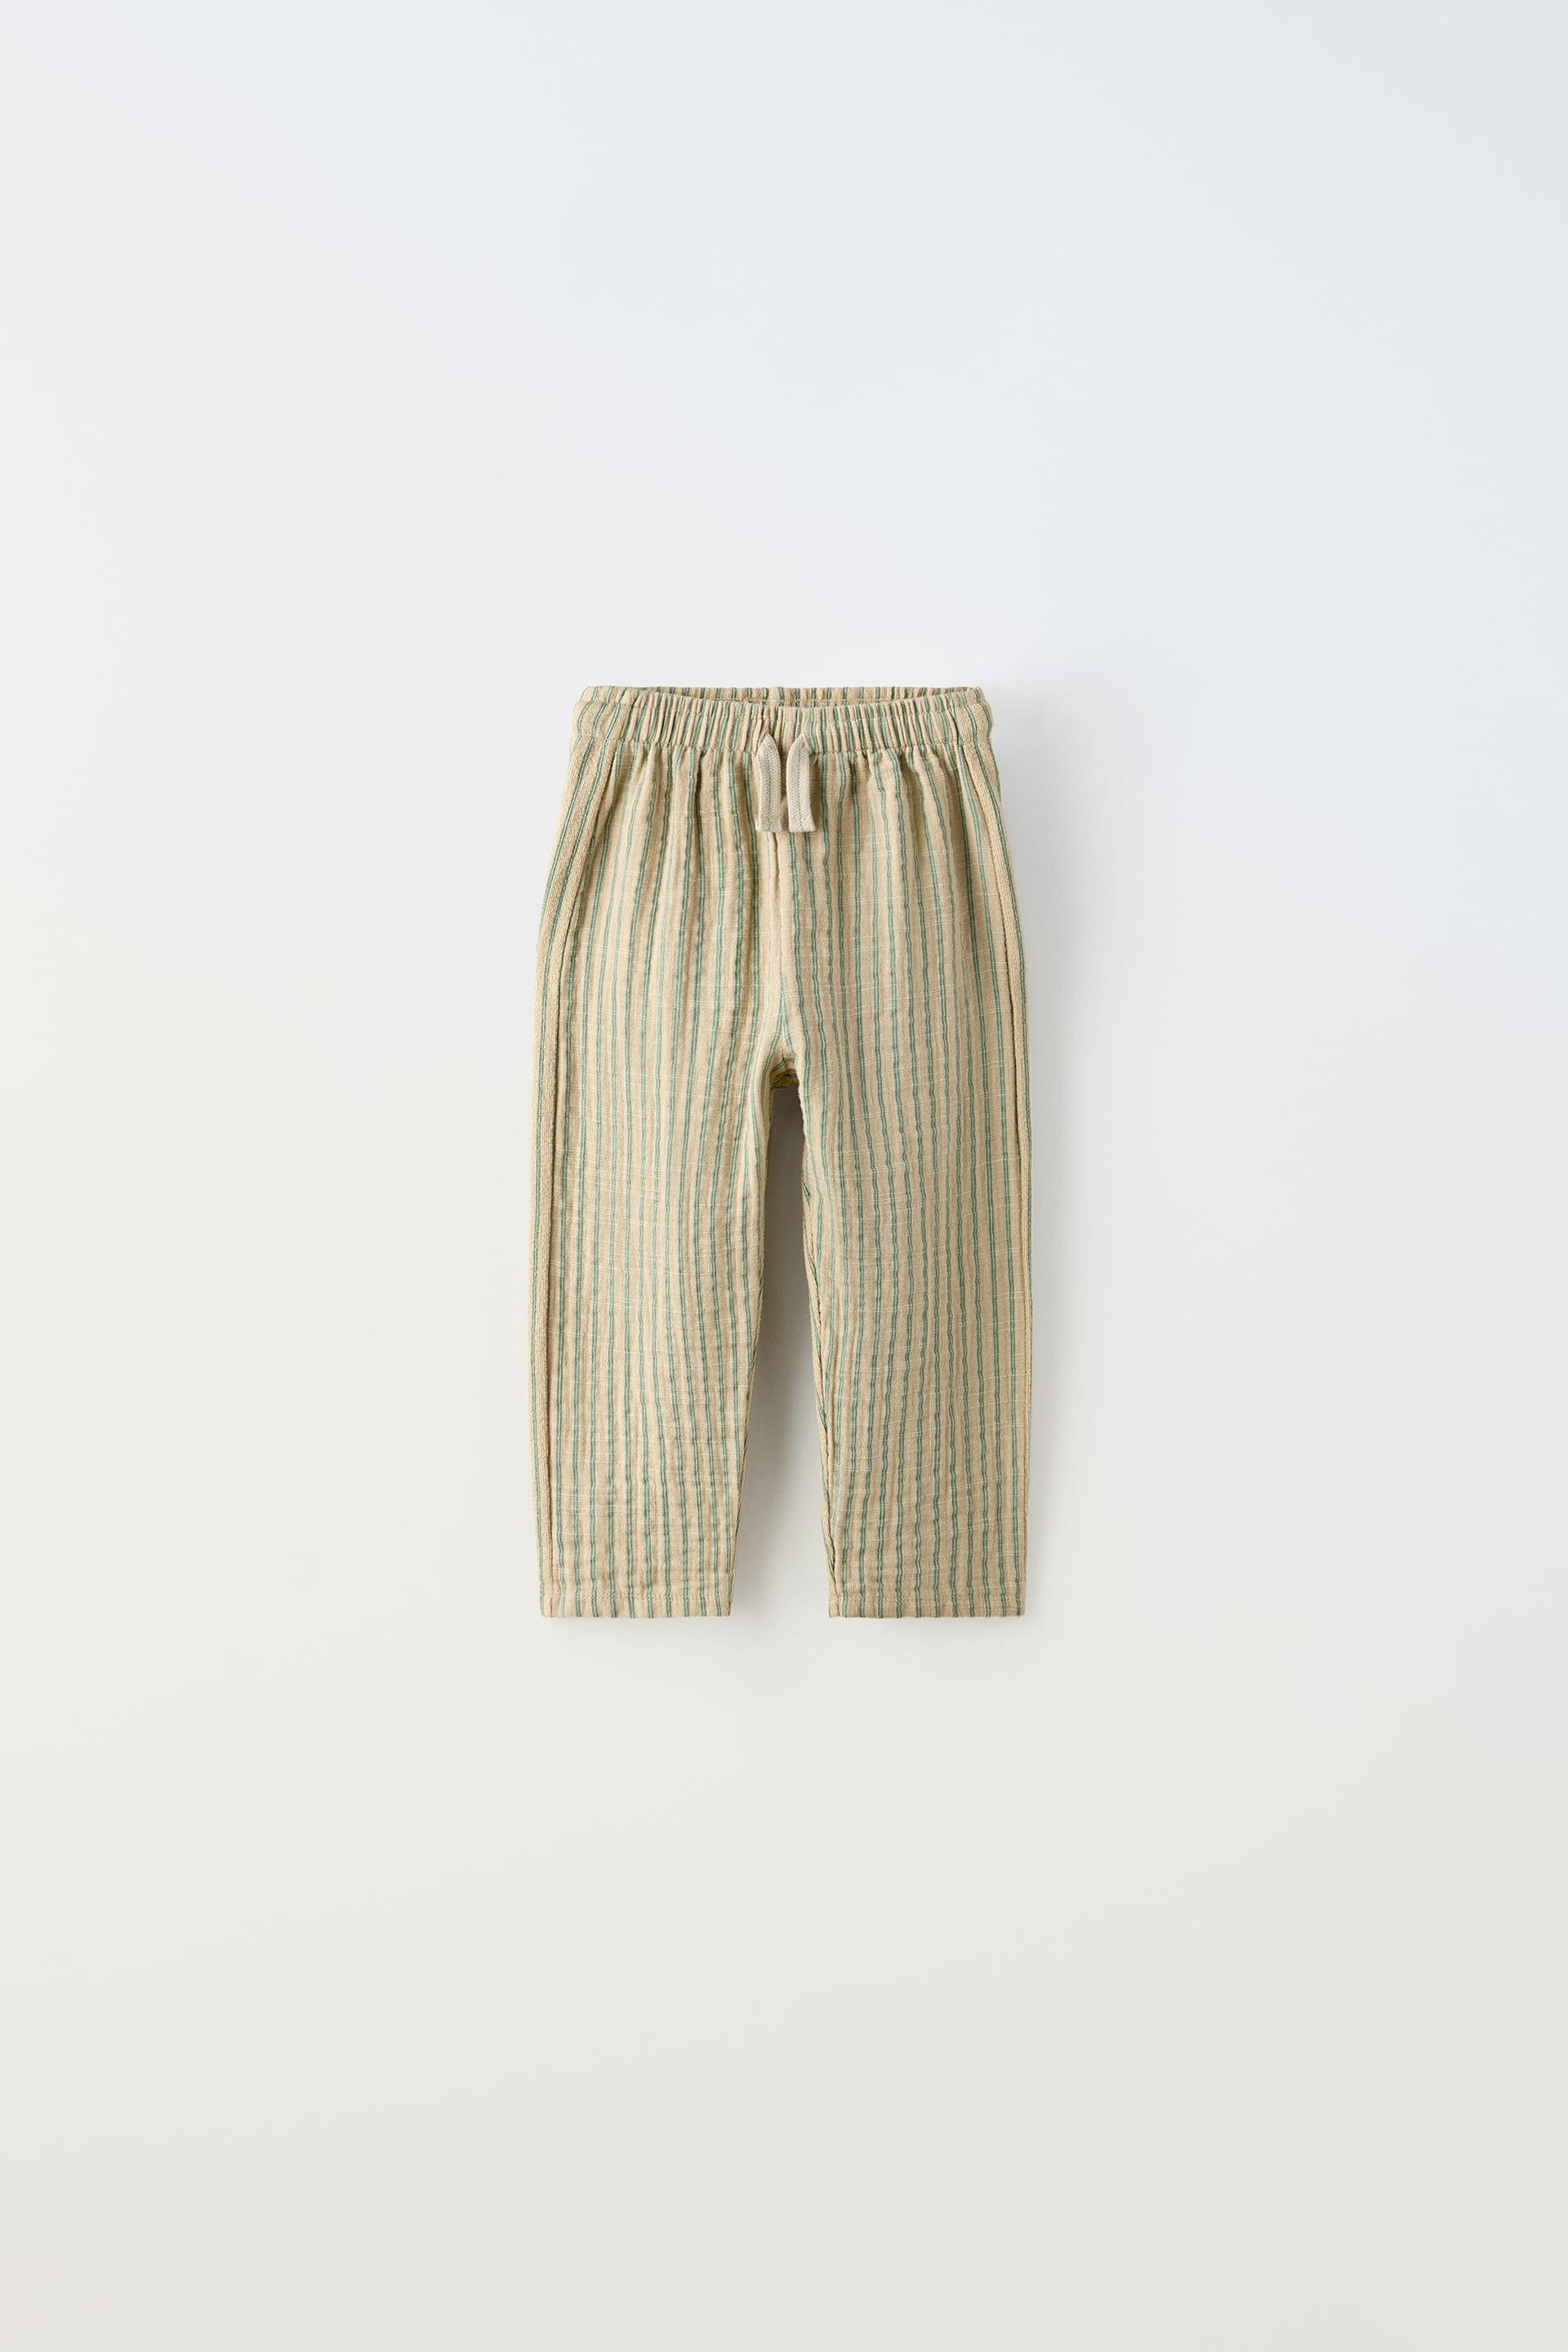 TEXTURED STRIPED PANTS by ZARA